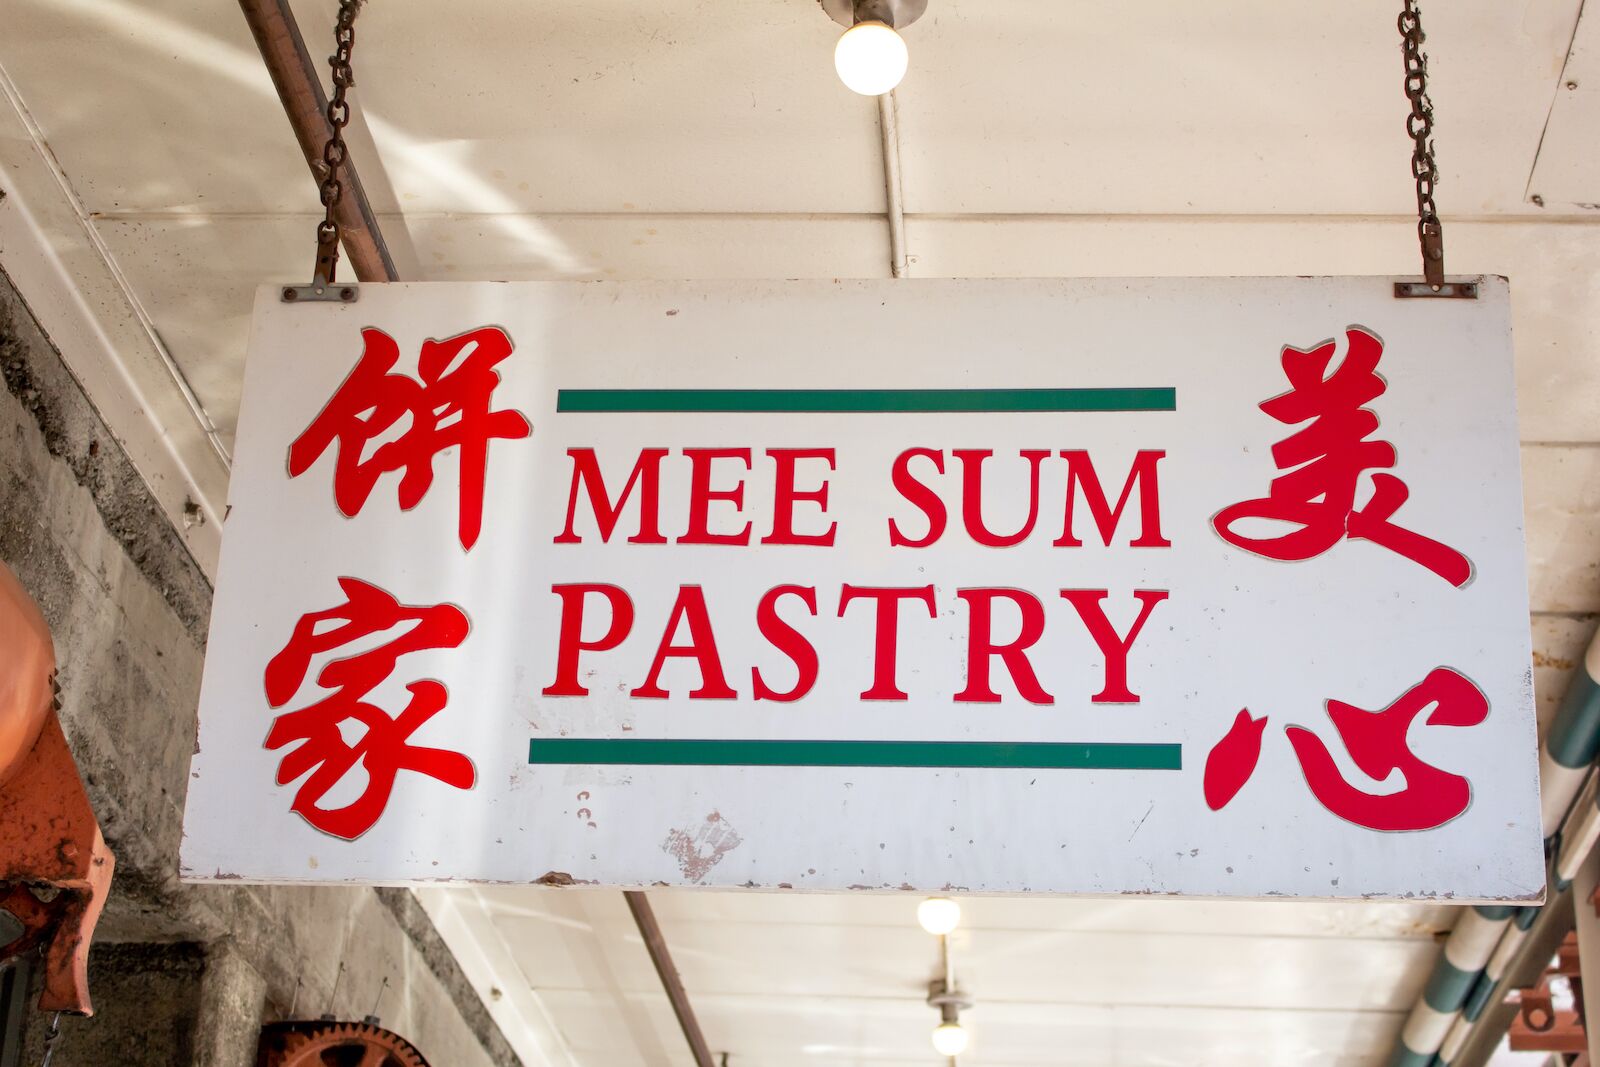 mee sum pastry sign pike place market